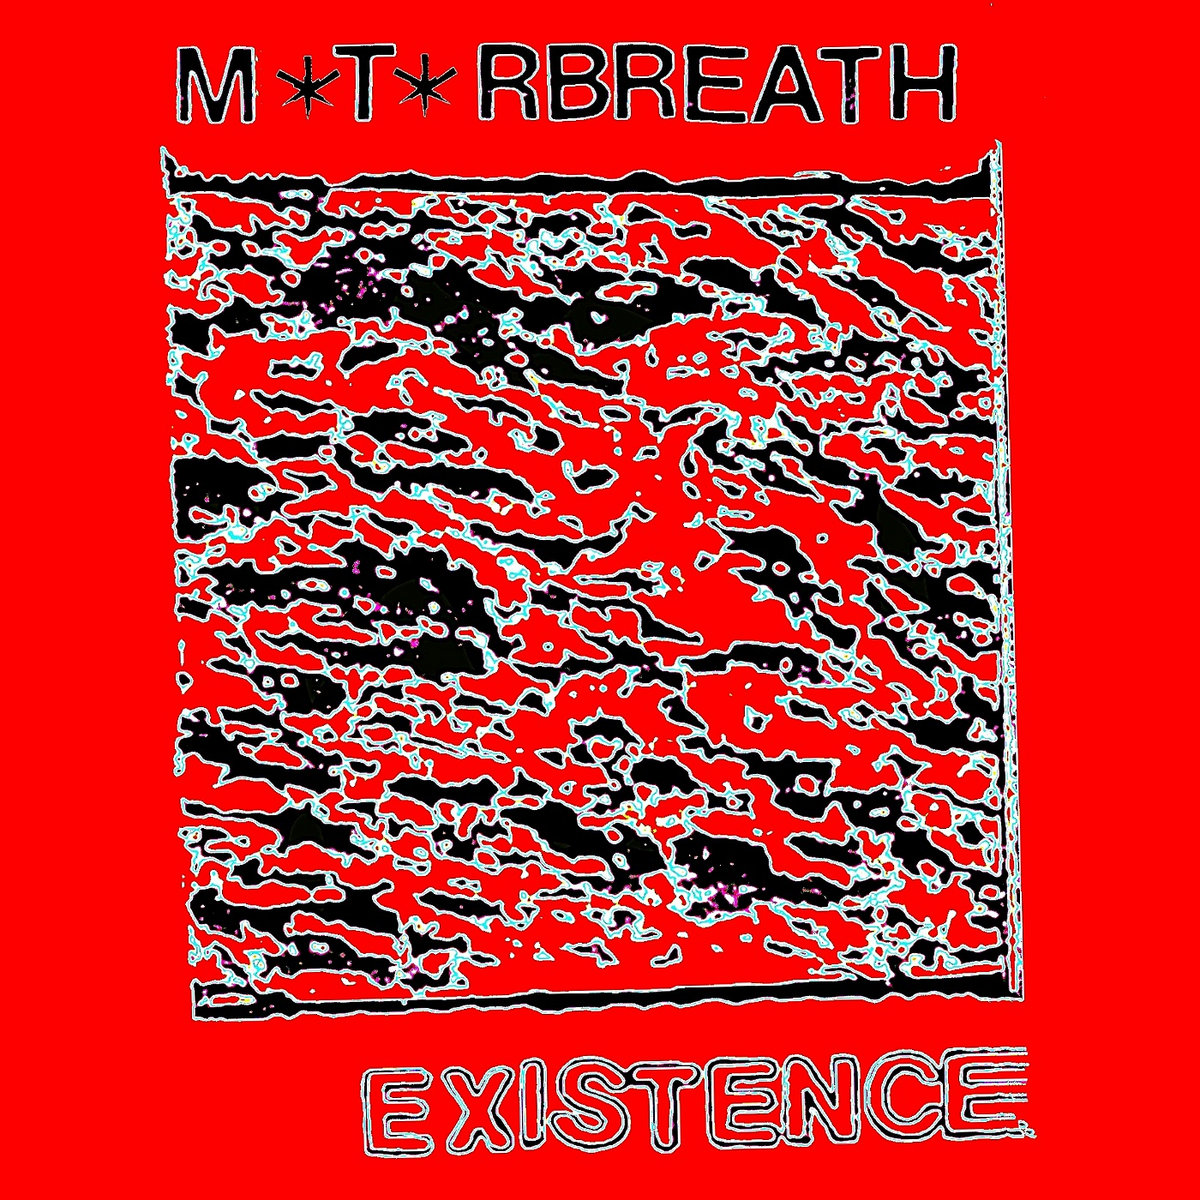 M*t*rbreath - "Existence" - 2023